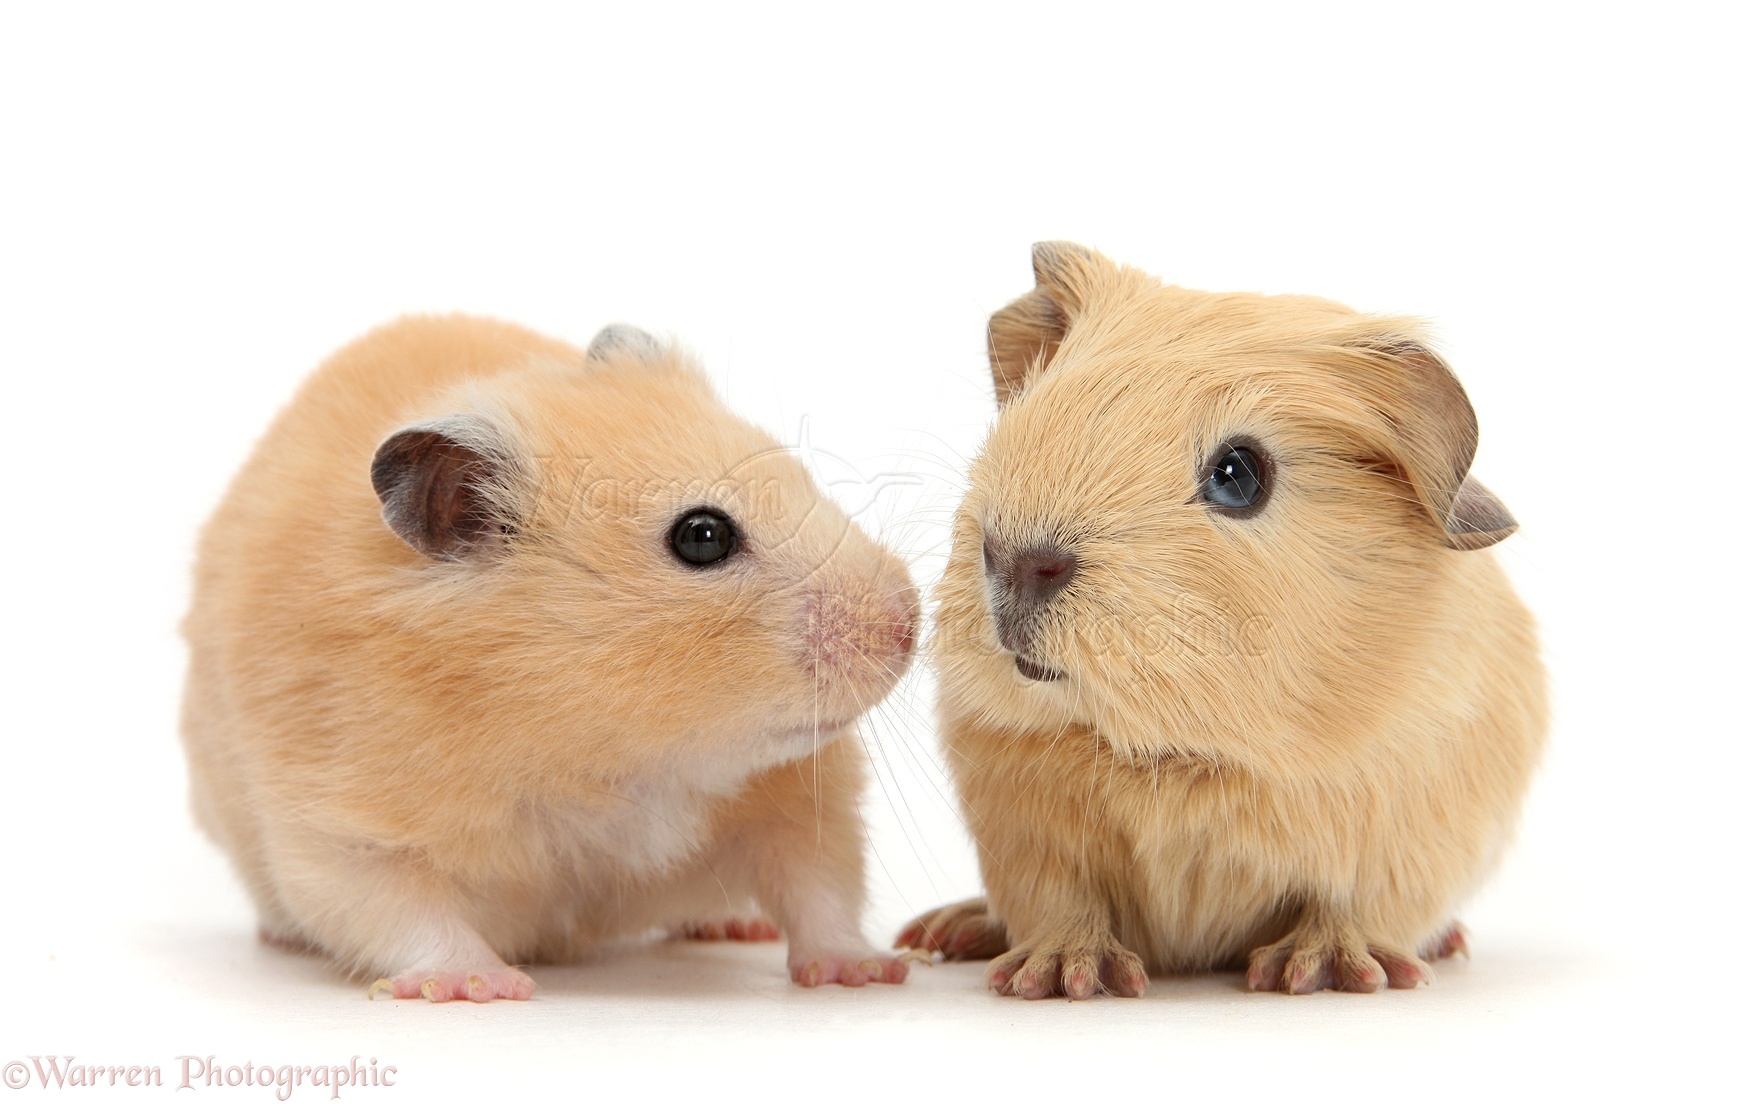 Baby Guinea pig and Golden Hamster photo WP25387